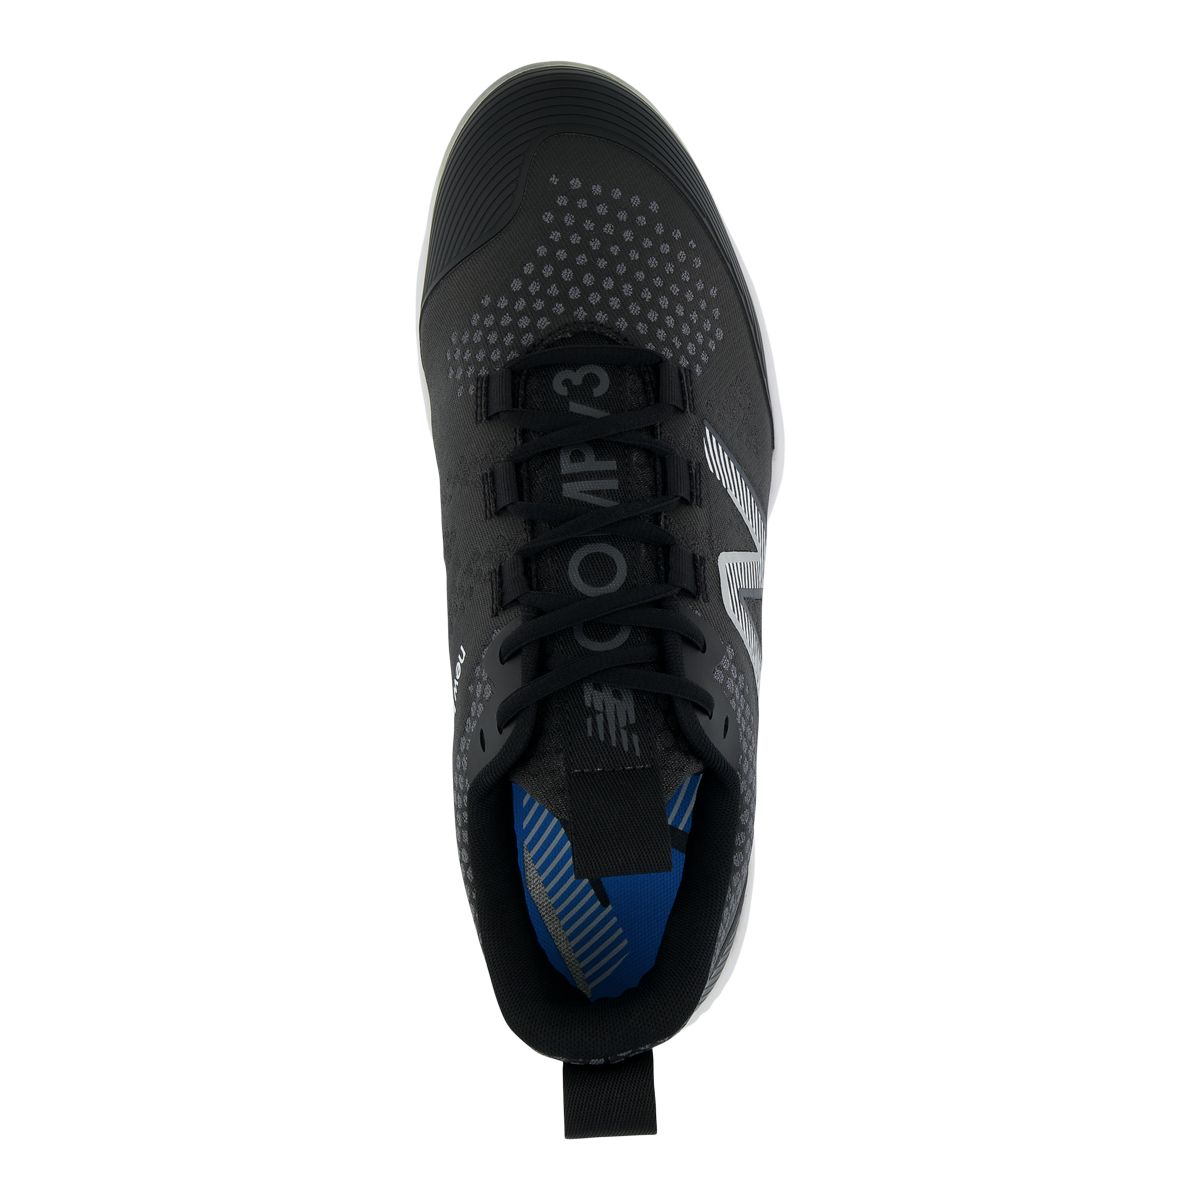 New Balance LCOMPv3 - Navy Hybrid Cleats - Hit After Hit